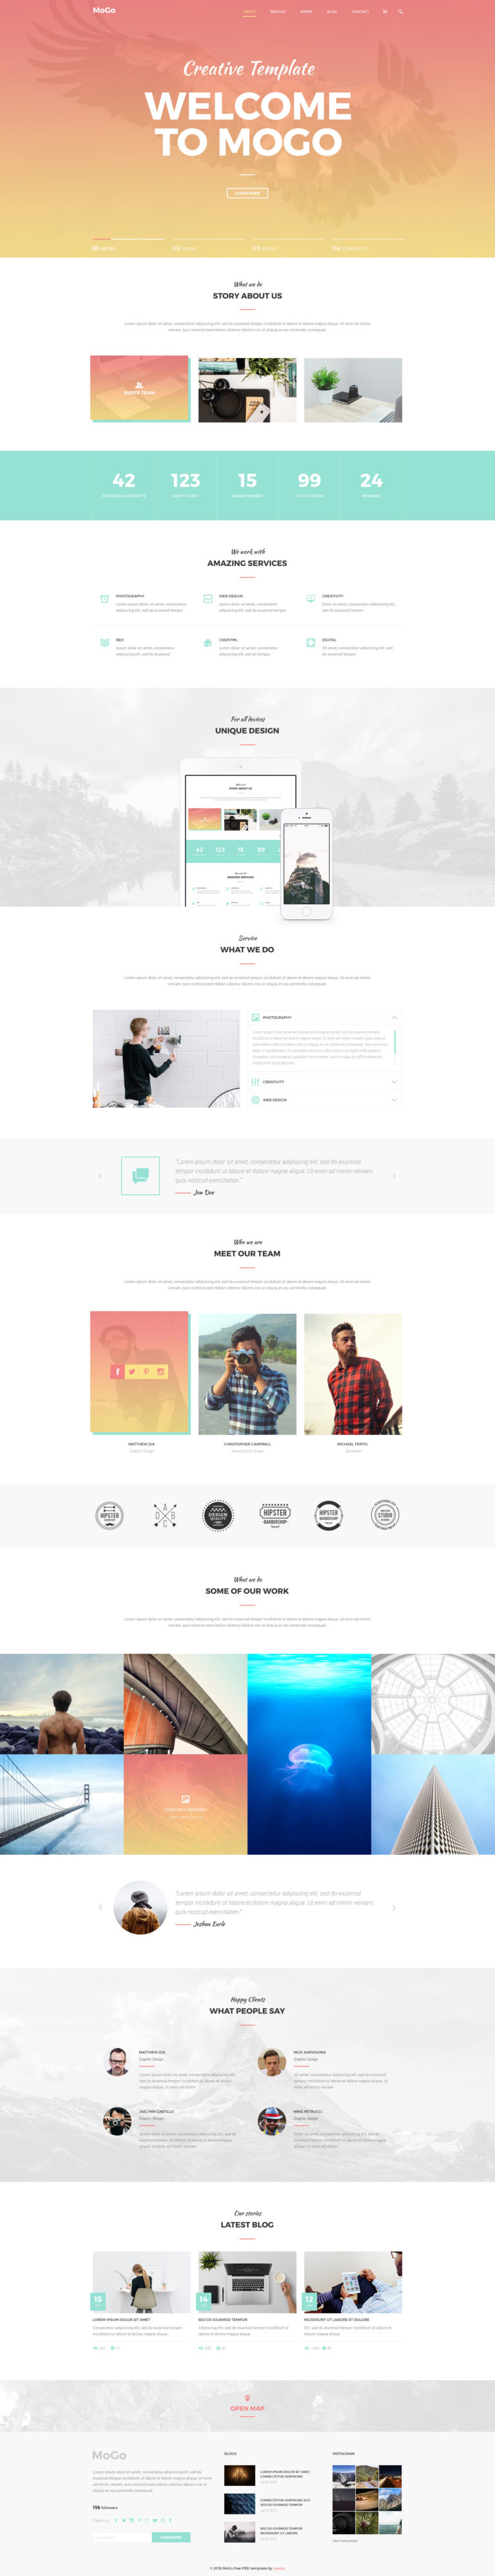 page flip html5 template free